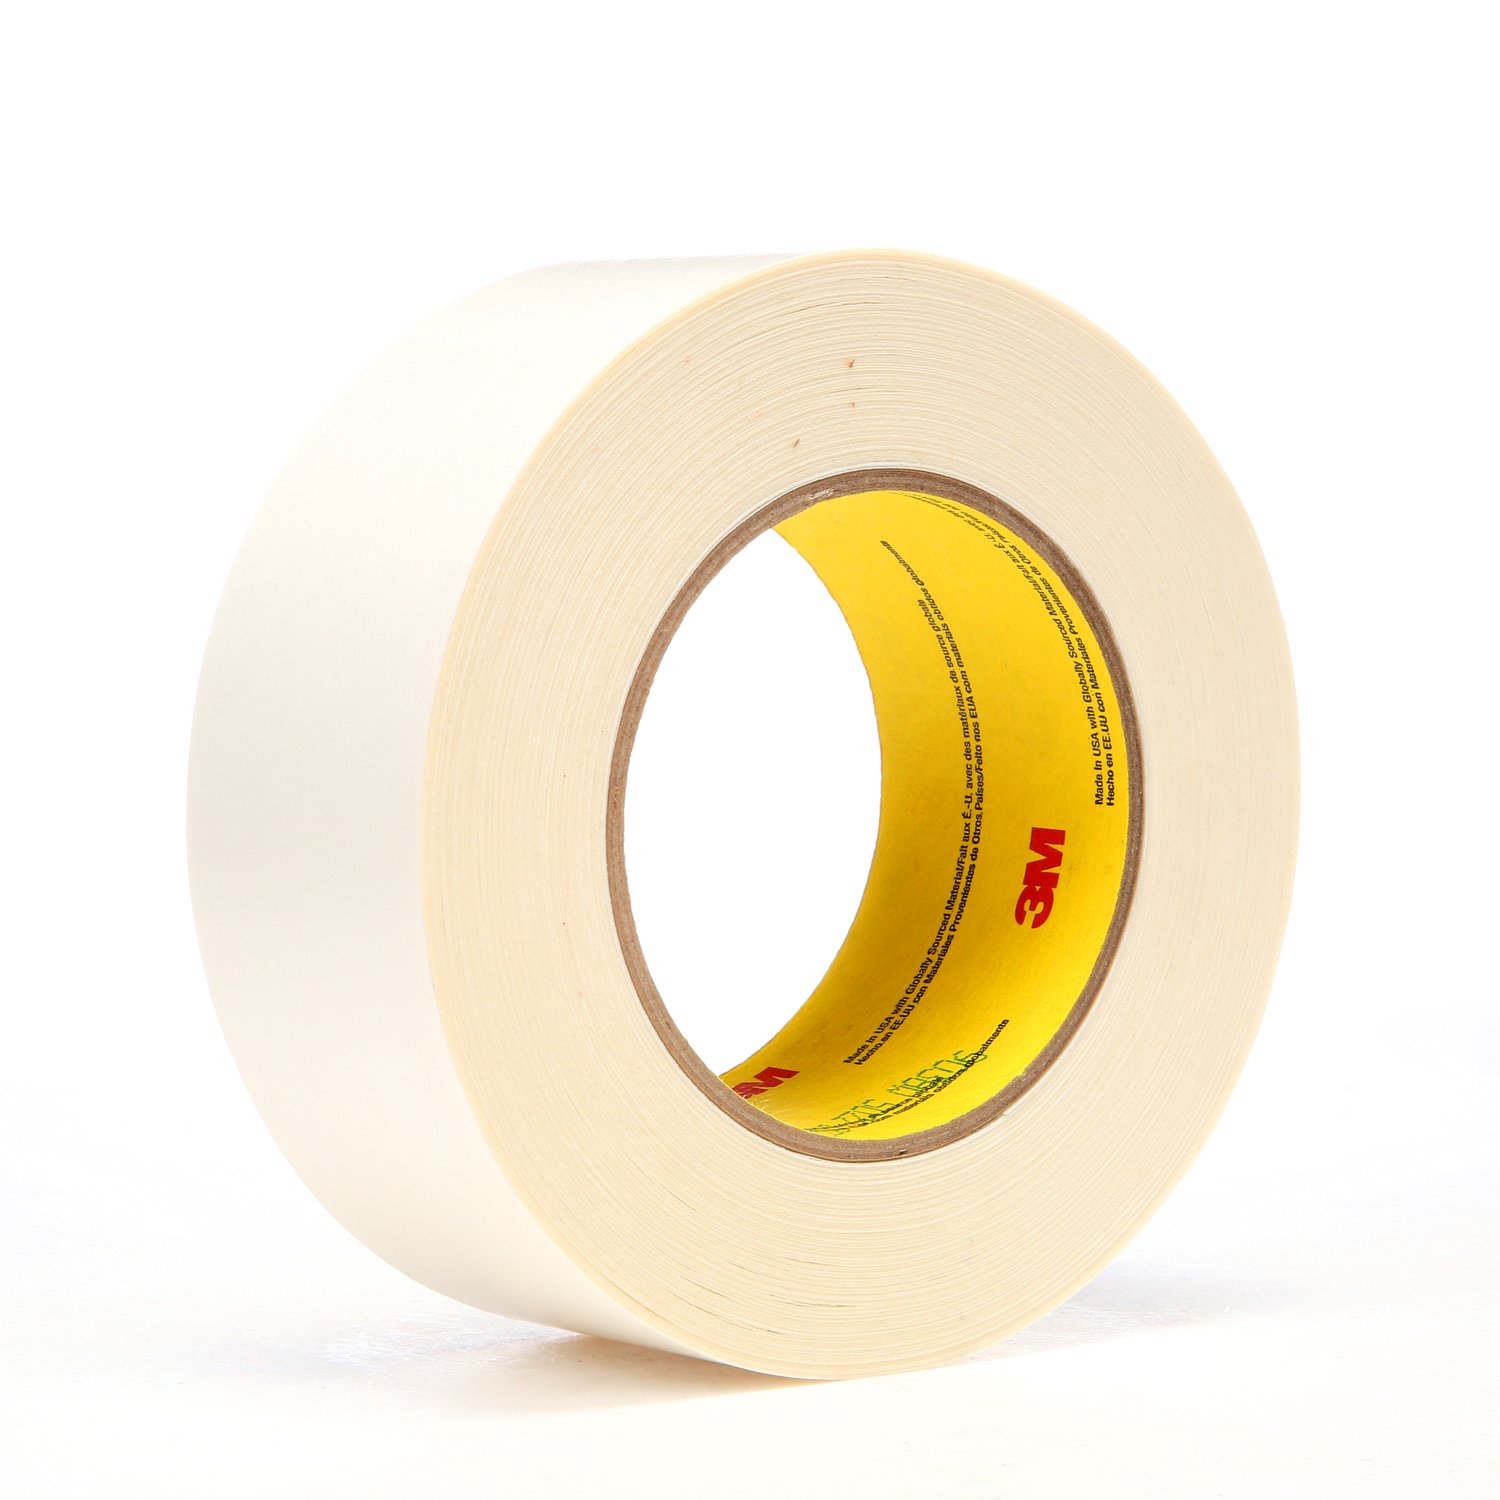 7100028066 - 3M Repulpable Double Coated Splicing Tape 9038W, White, 48 mm x 55 m, 3
mil, 24 rolls per case